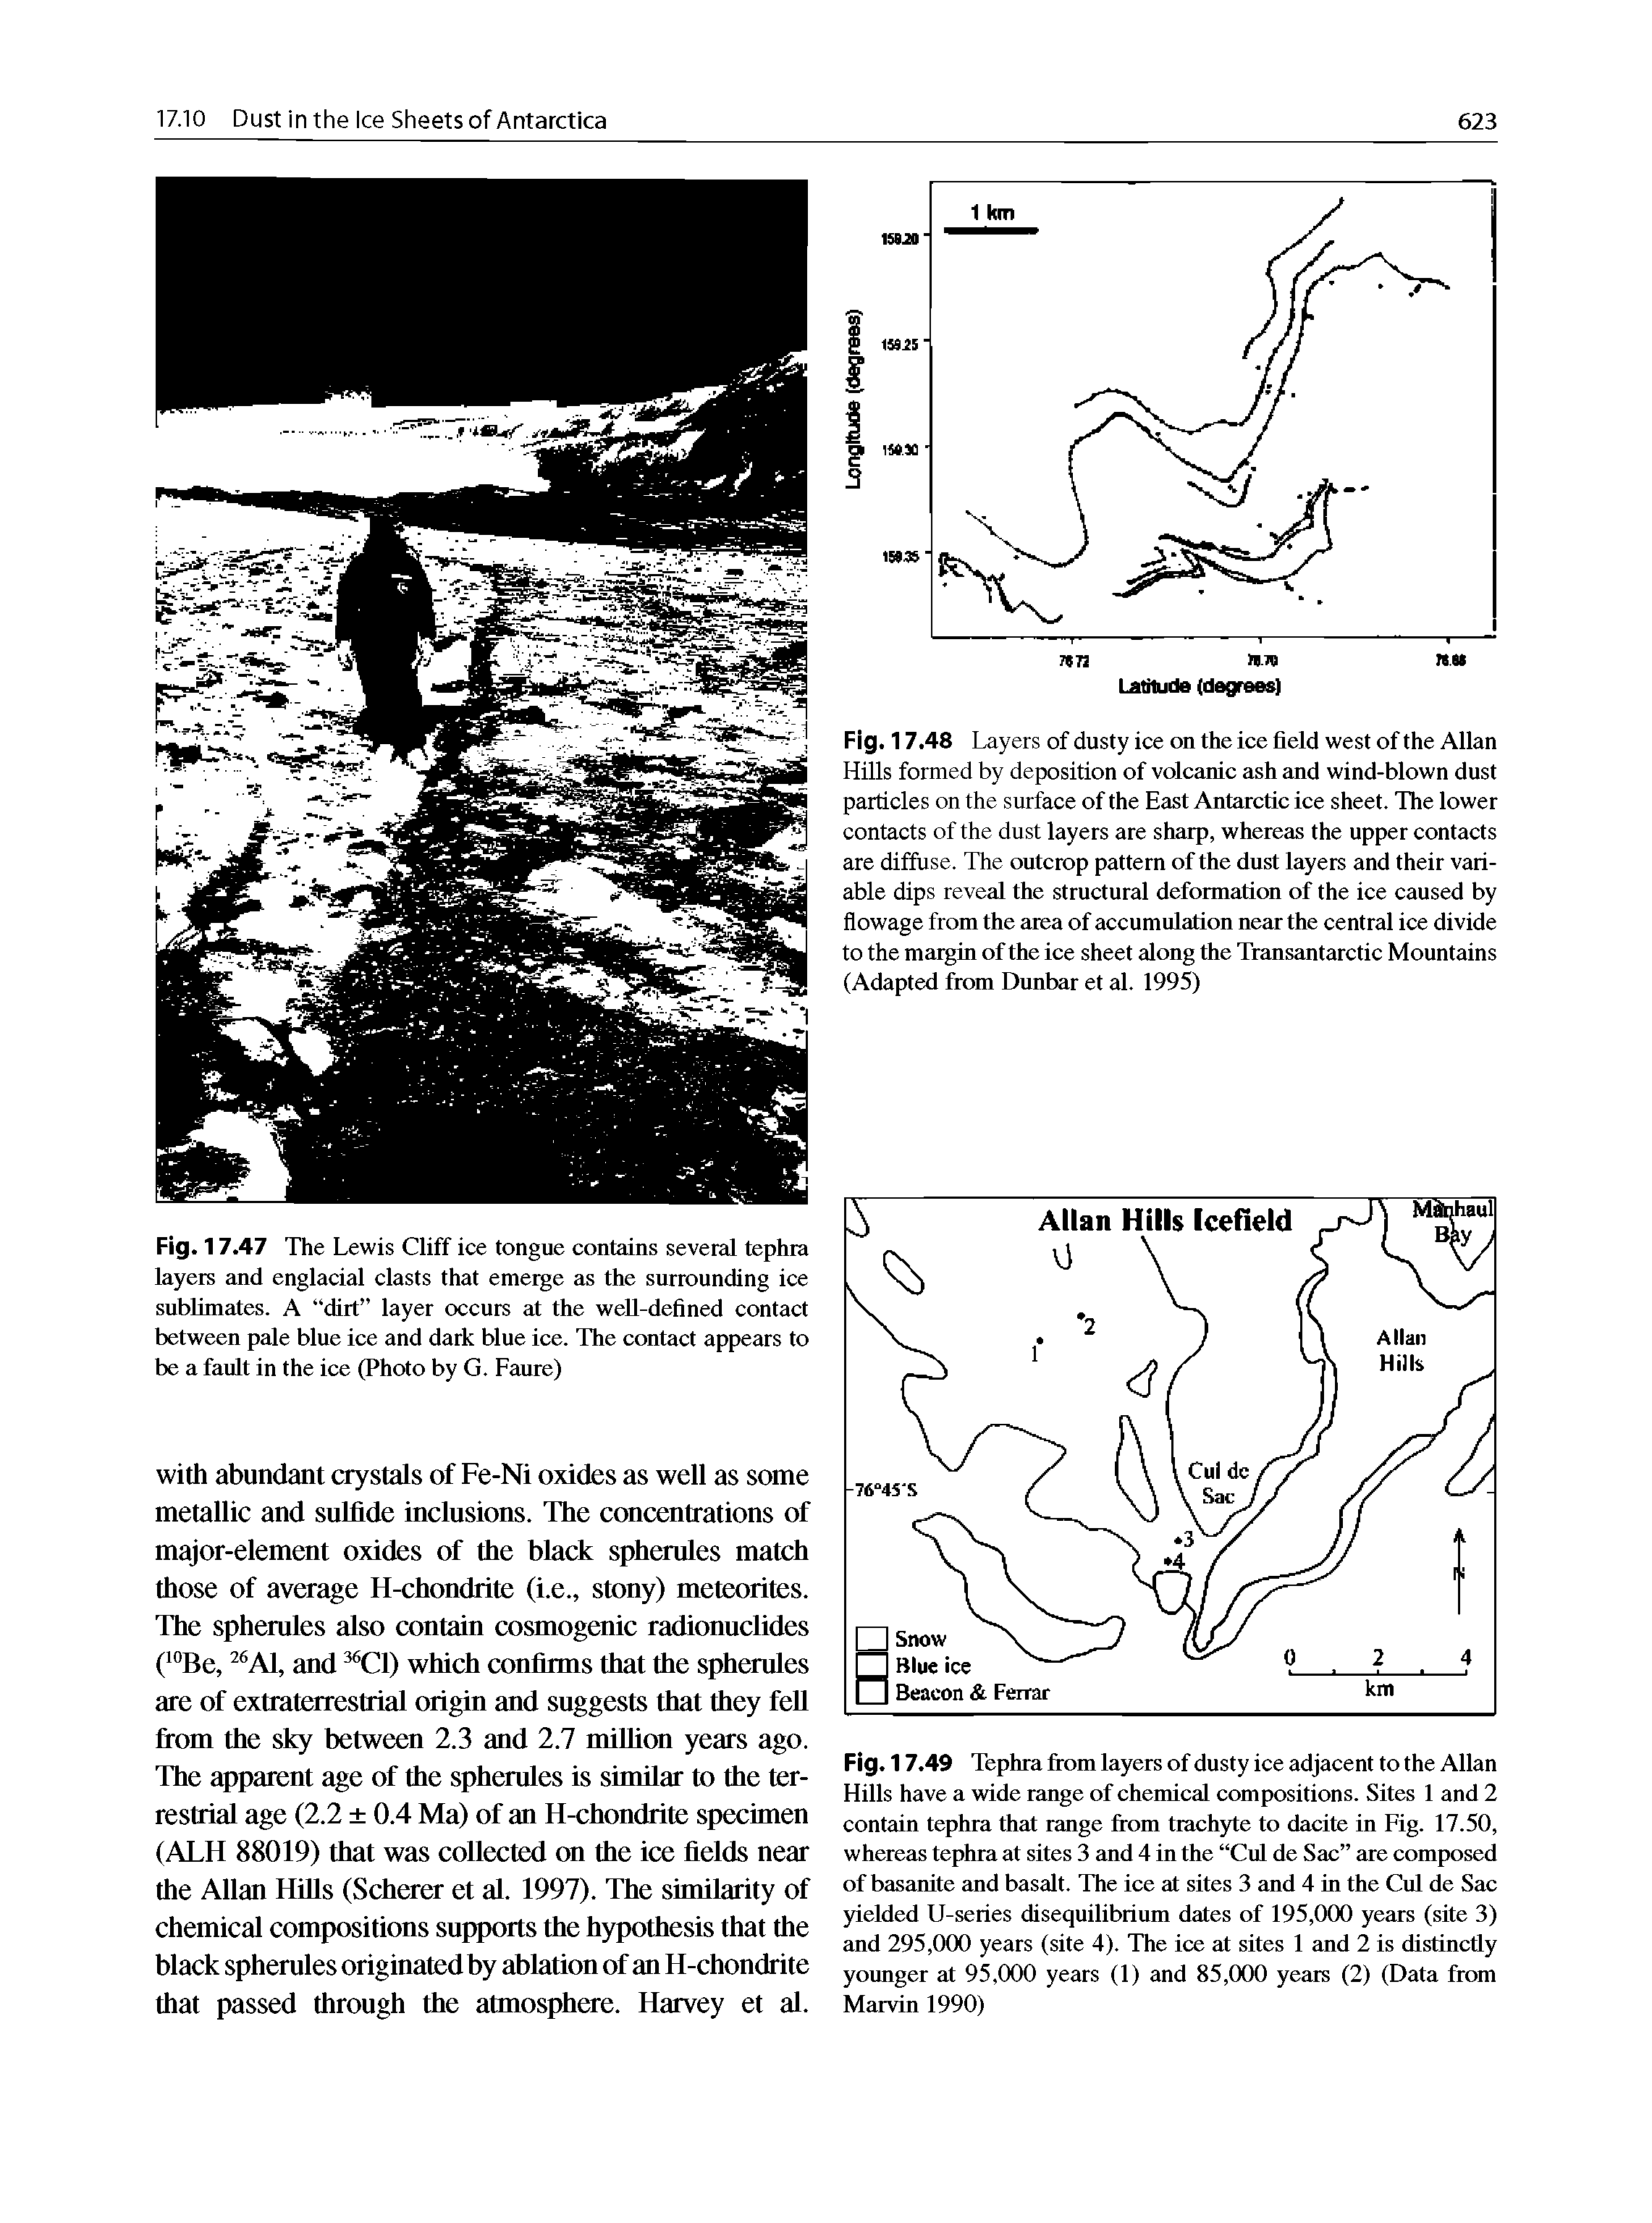 Fig. 17.49 Tephra from layers of dusty ice adjacent to the Allan Hills have a wide range of chemical compositions. Sites 1 and 2 contain tephra that range from trachyte to dacite in Fig. 17.50, whereas tephra at sites 3 and 4 in the Cul de Sac are composed of basanite and basalt. The ice at sites 3 and 4 in the Cul de Sac yielded U-series disequilibrium dates of 195,000 years (site 3) and 295,(XX) years (site 4). The ice at sites 1 and 2 is distinctly younger at 95,(X)0 years (1) and 85,000 years (2) (Data from Marvin 1990)...